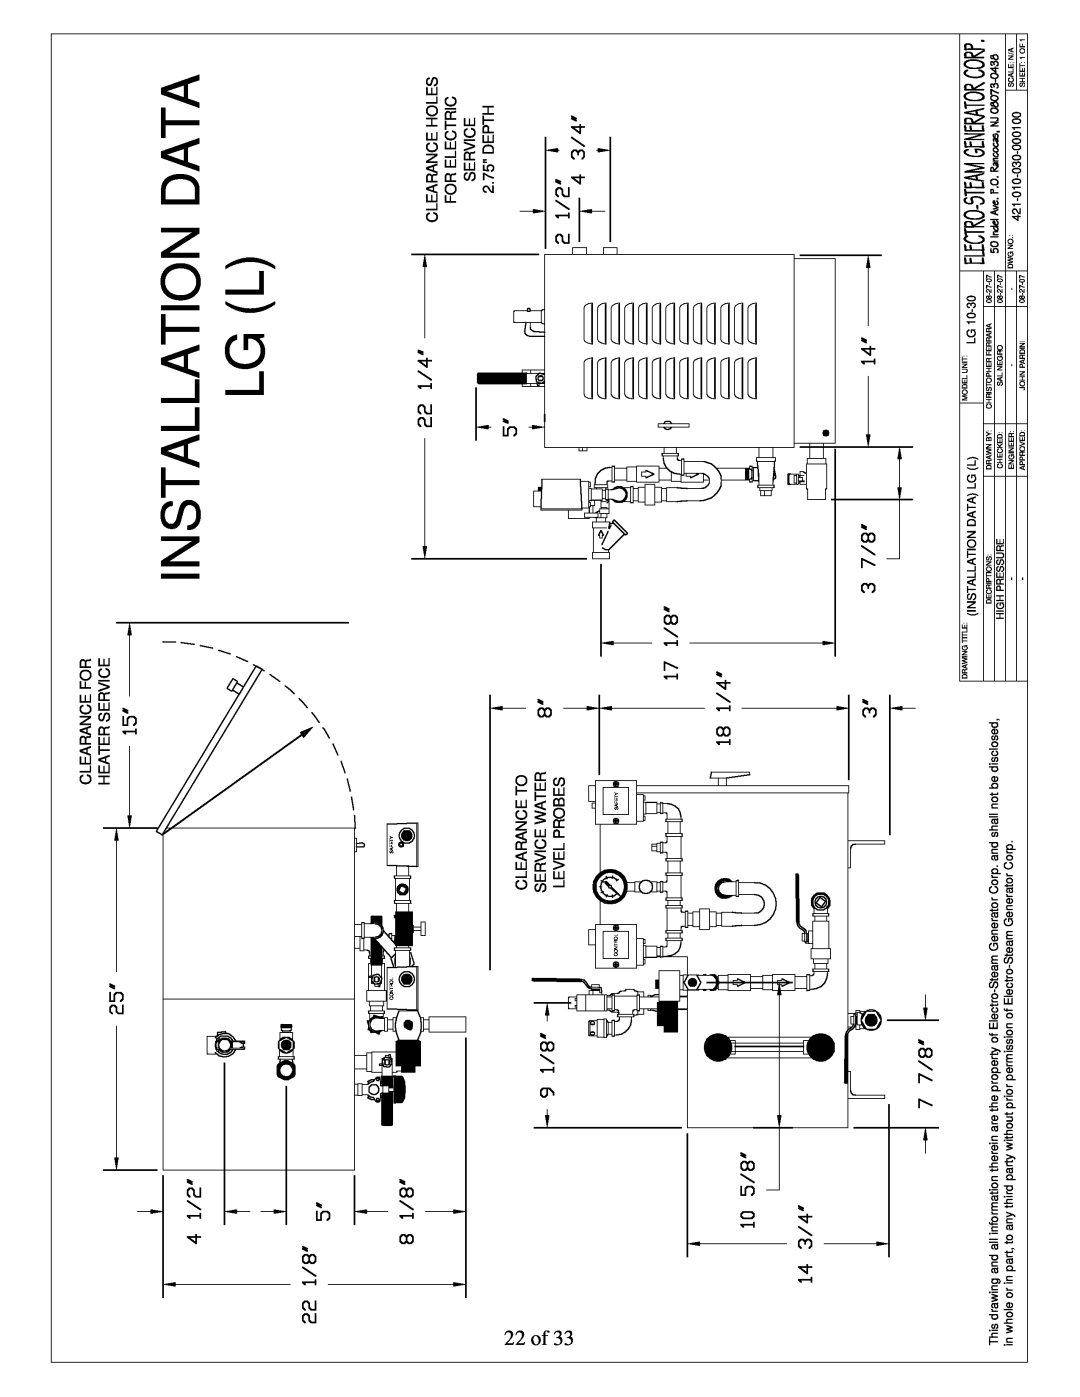 LG Electronics 30, 10 user manual Installation Data Lg L, 22 of, Clearance For Heater Service 